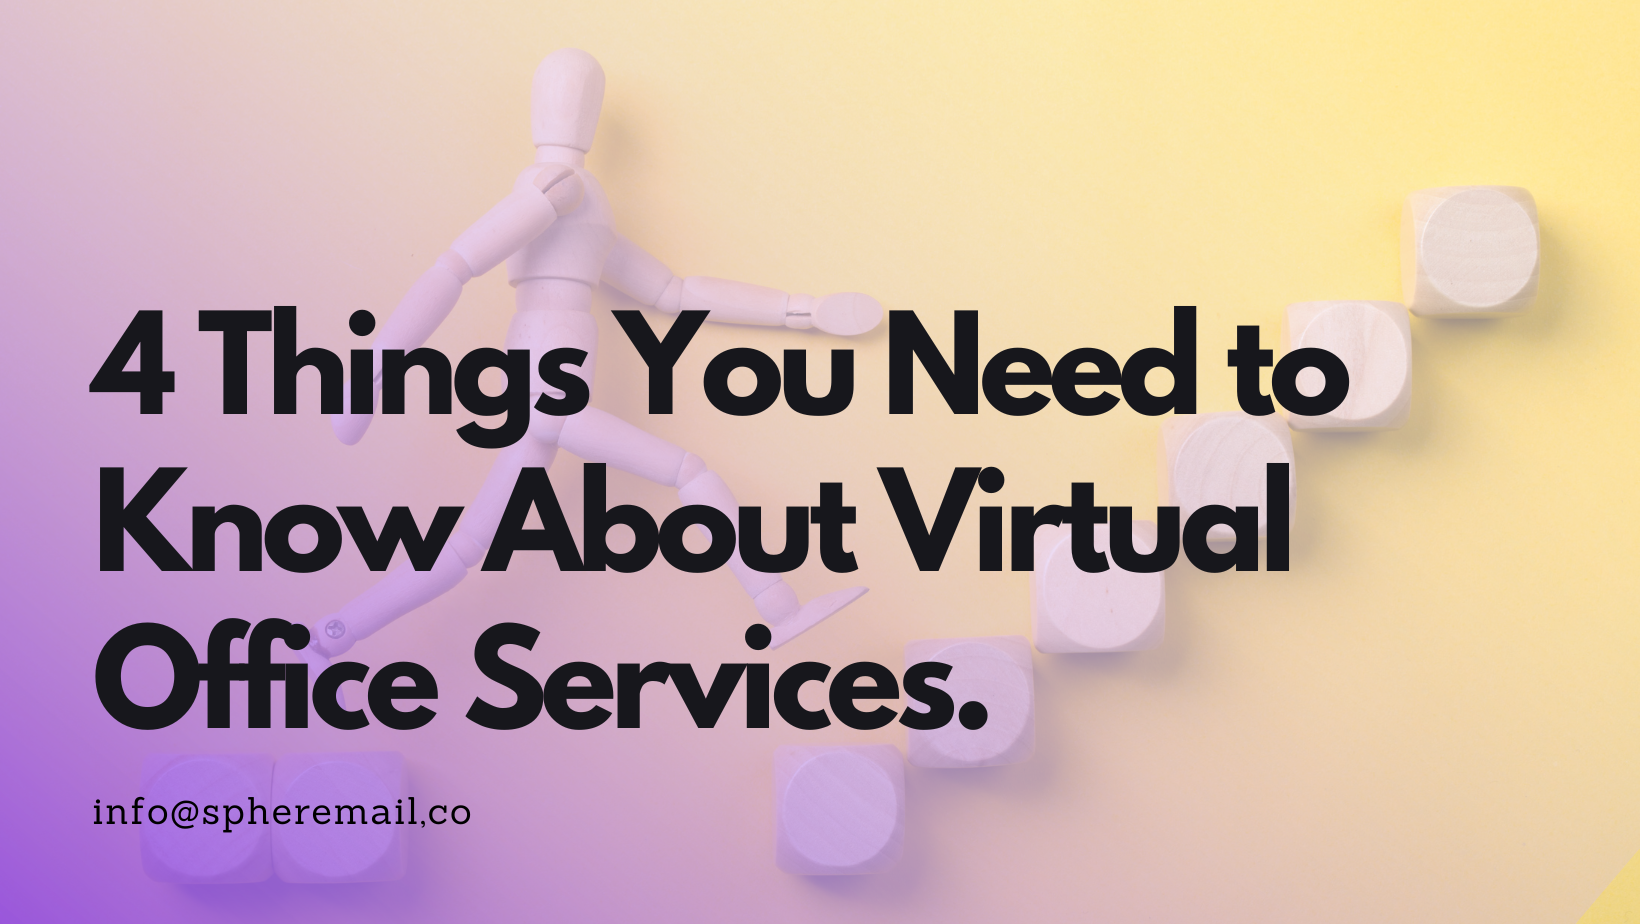 4 Things You Need to Know About Virtual Office Services. (1)